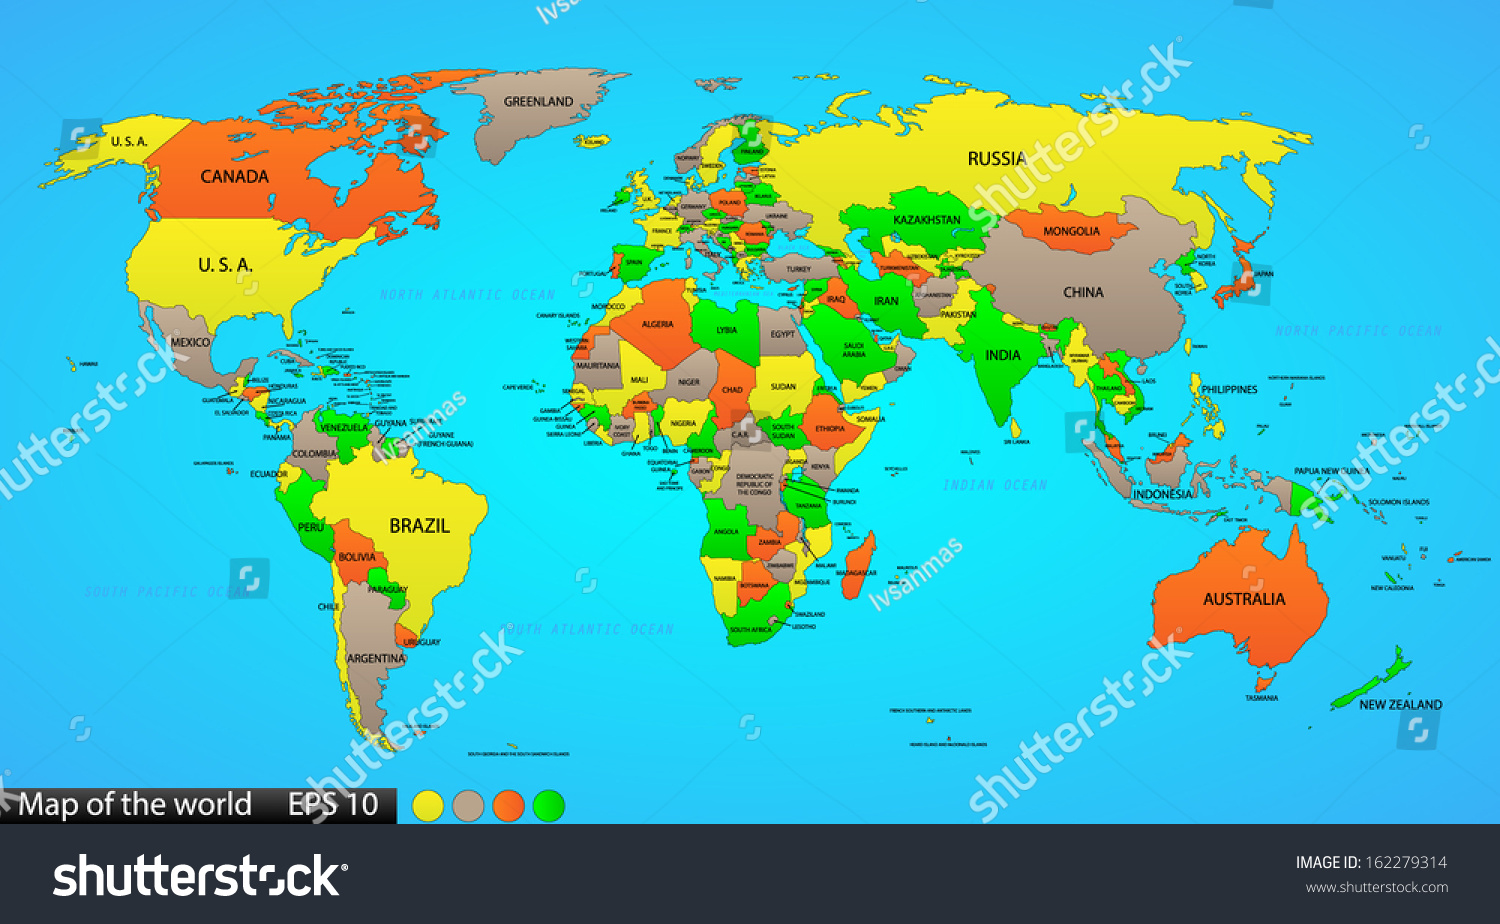 Political World Map On Ocean Blue Stock Vector Royalty Free